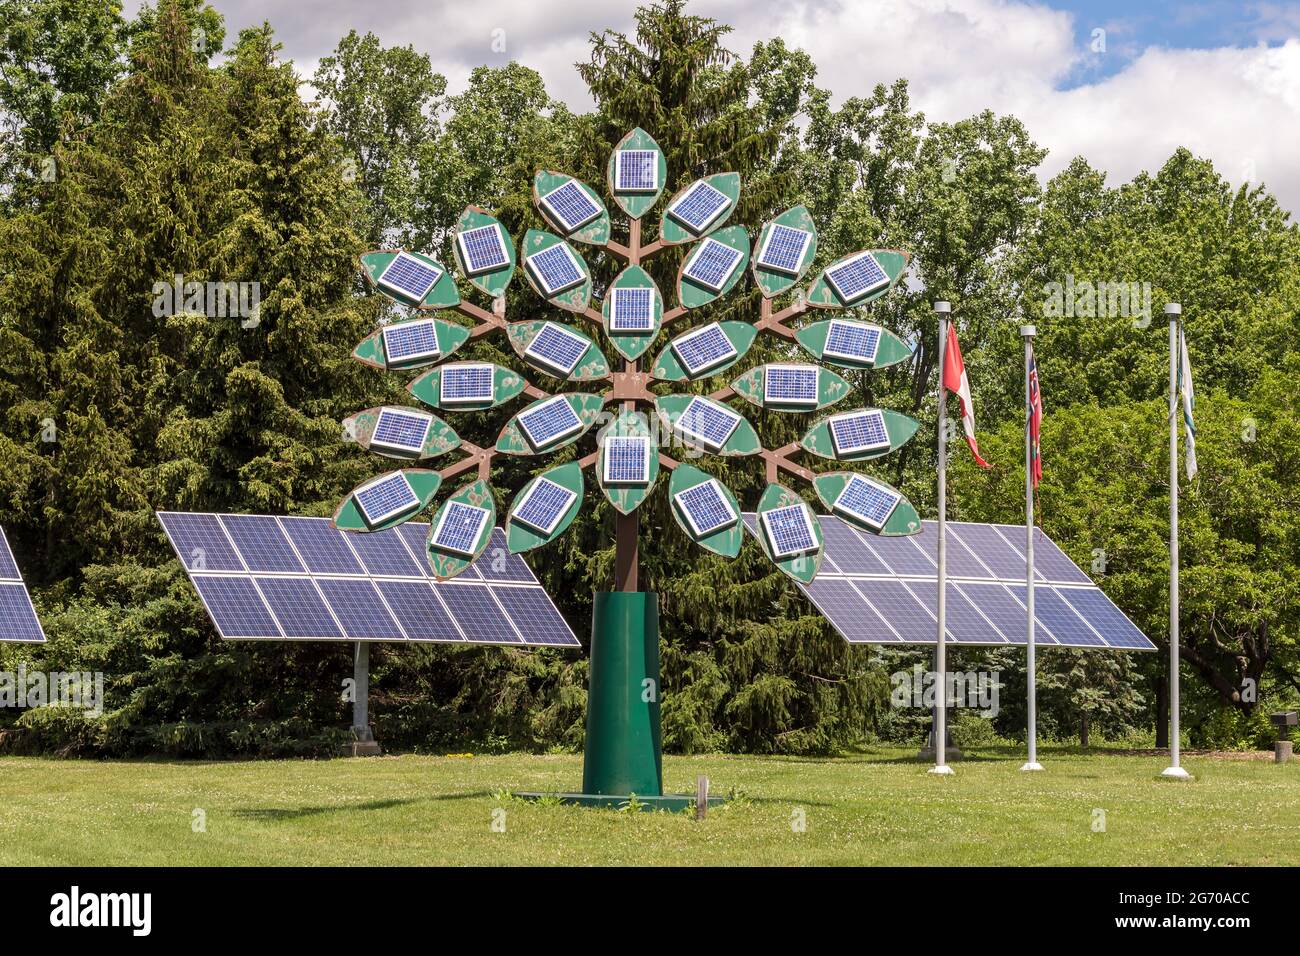 Solar panels on the leaves of a tree shaped metal structure. Three solar panels and flags, including the Canadian flag, in the background. Stock Photo